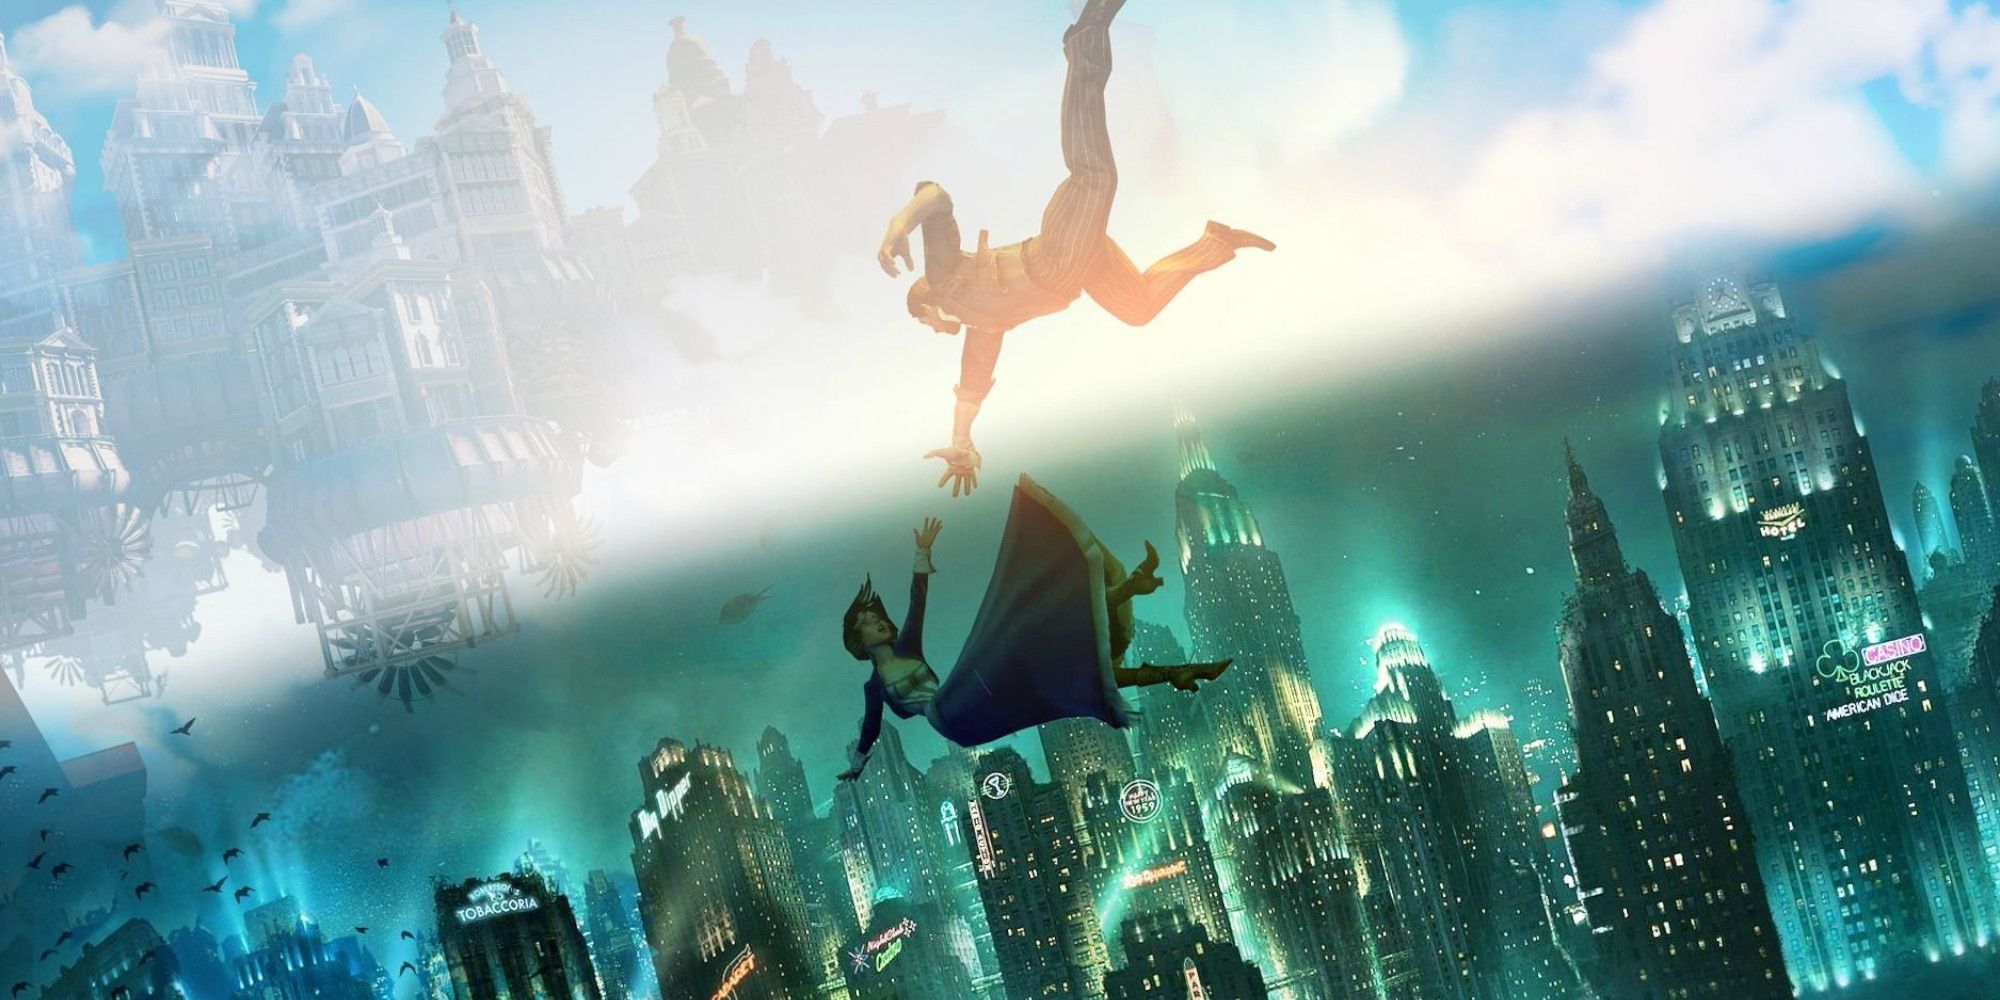 The characters transcend worlds in BioShock Infinite